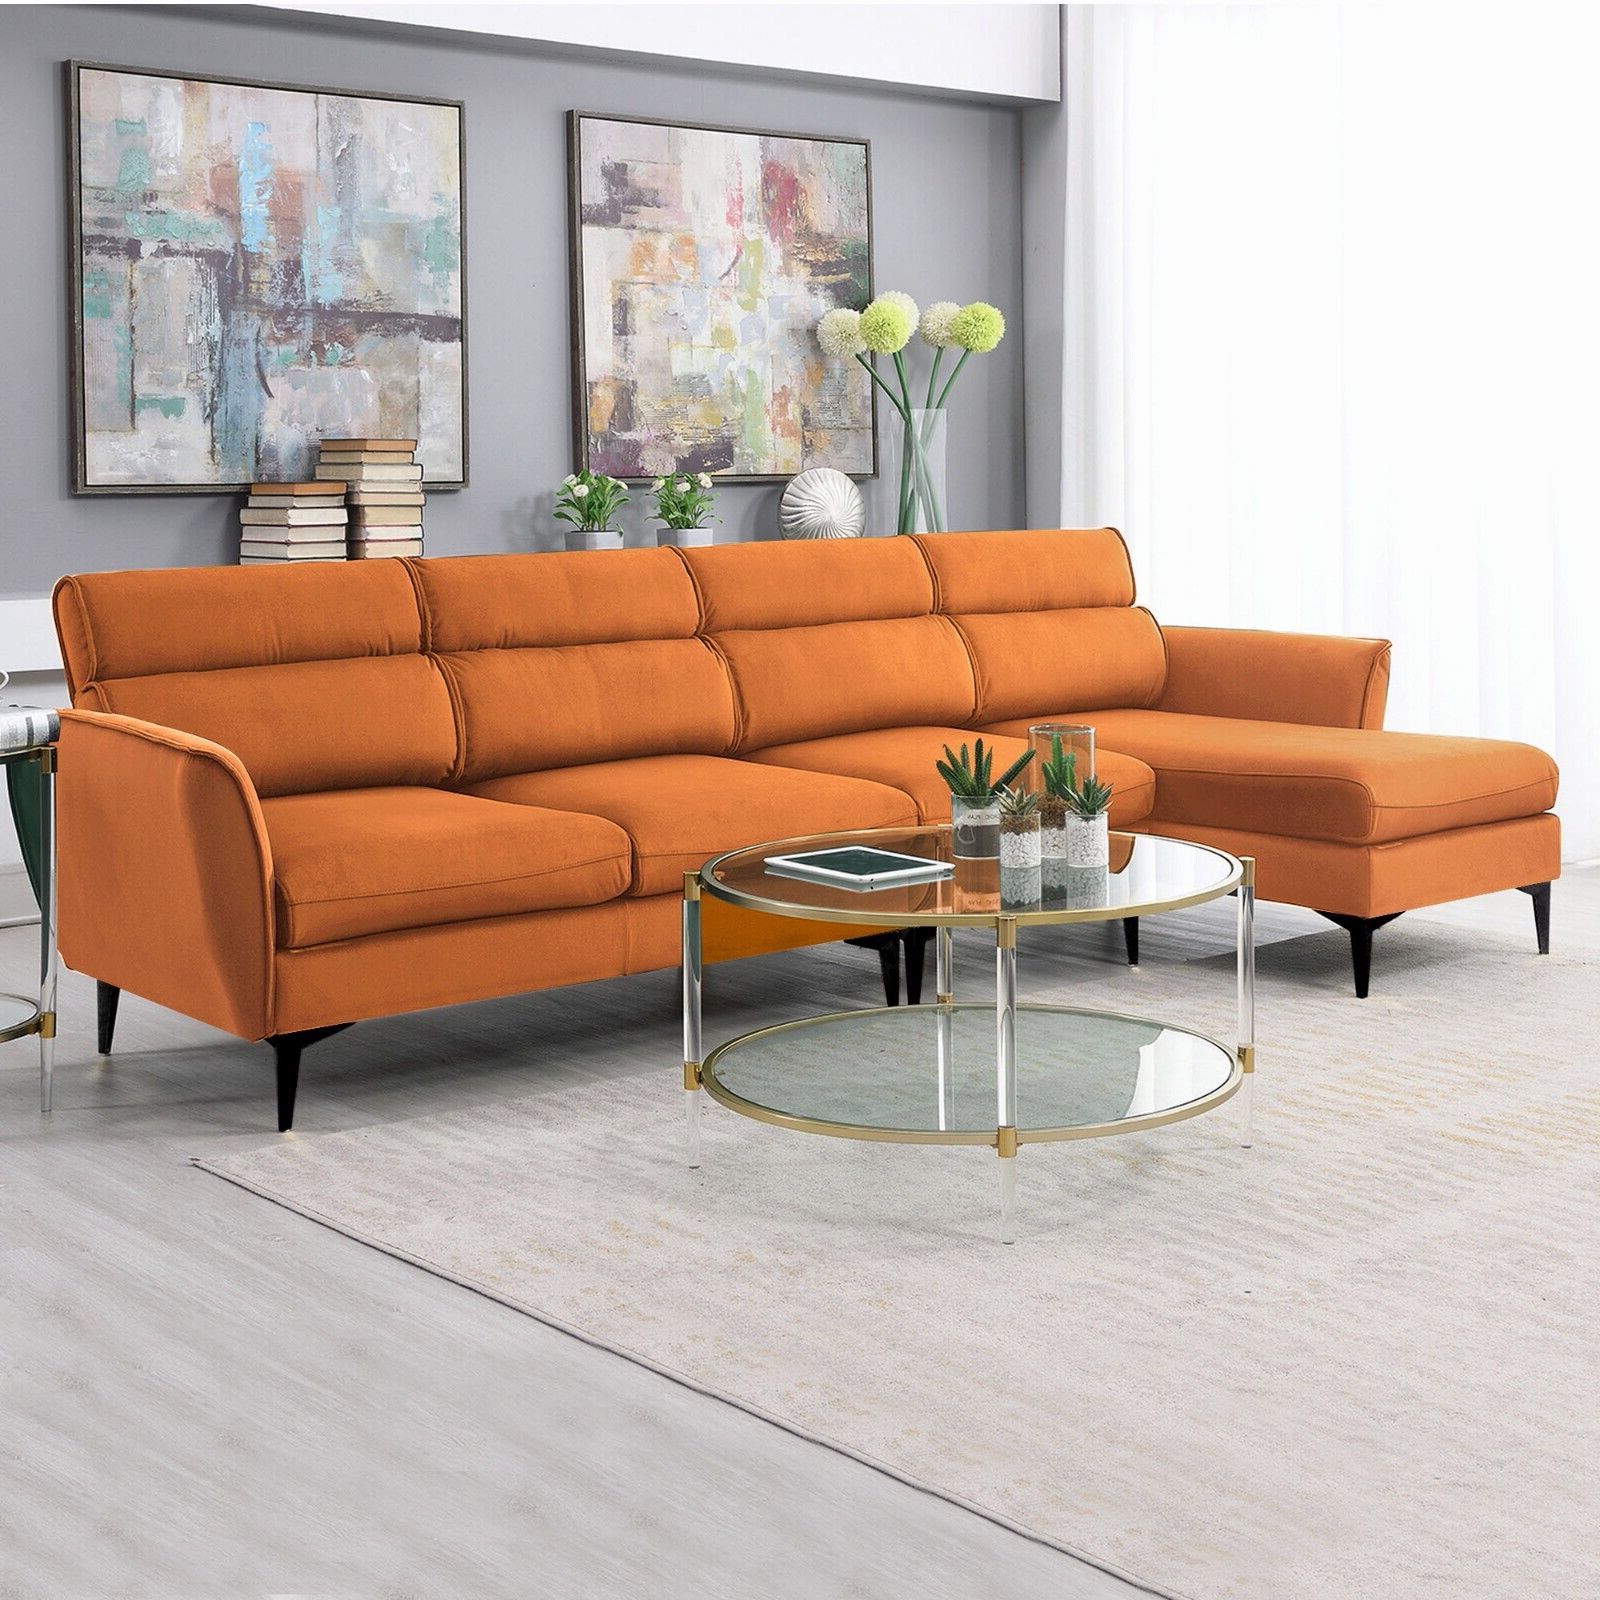 Modern Convertible Sectional Sofa Modular Couch With Reversible Chaise  Metal Leg – Asa College: Florida Within Sectional Couches With Reversible Chaises (View 11 of 20)